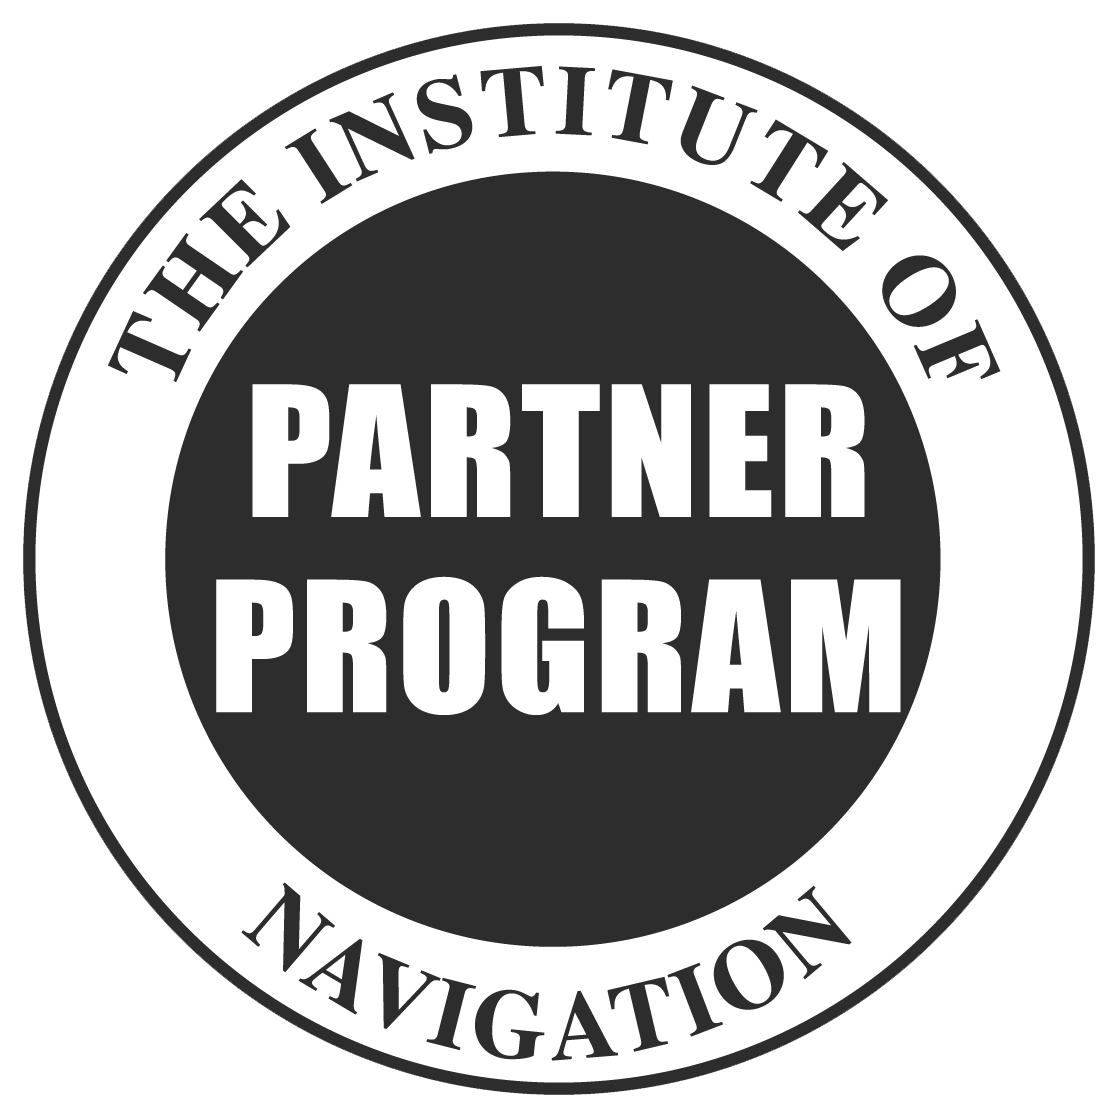 The Institute of Navigation